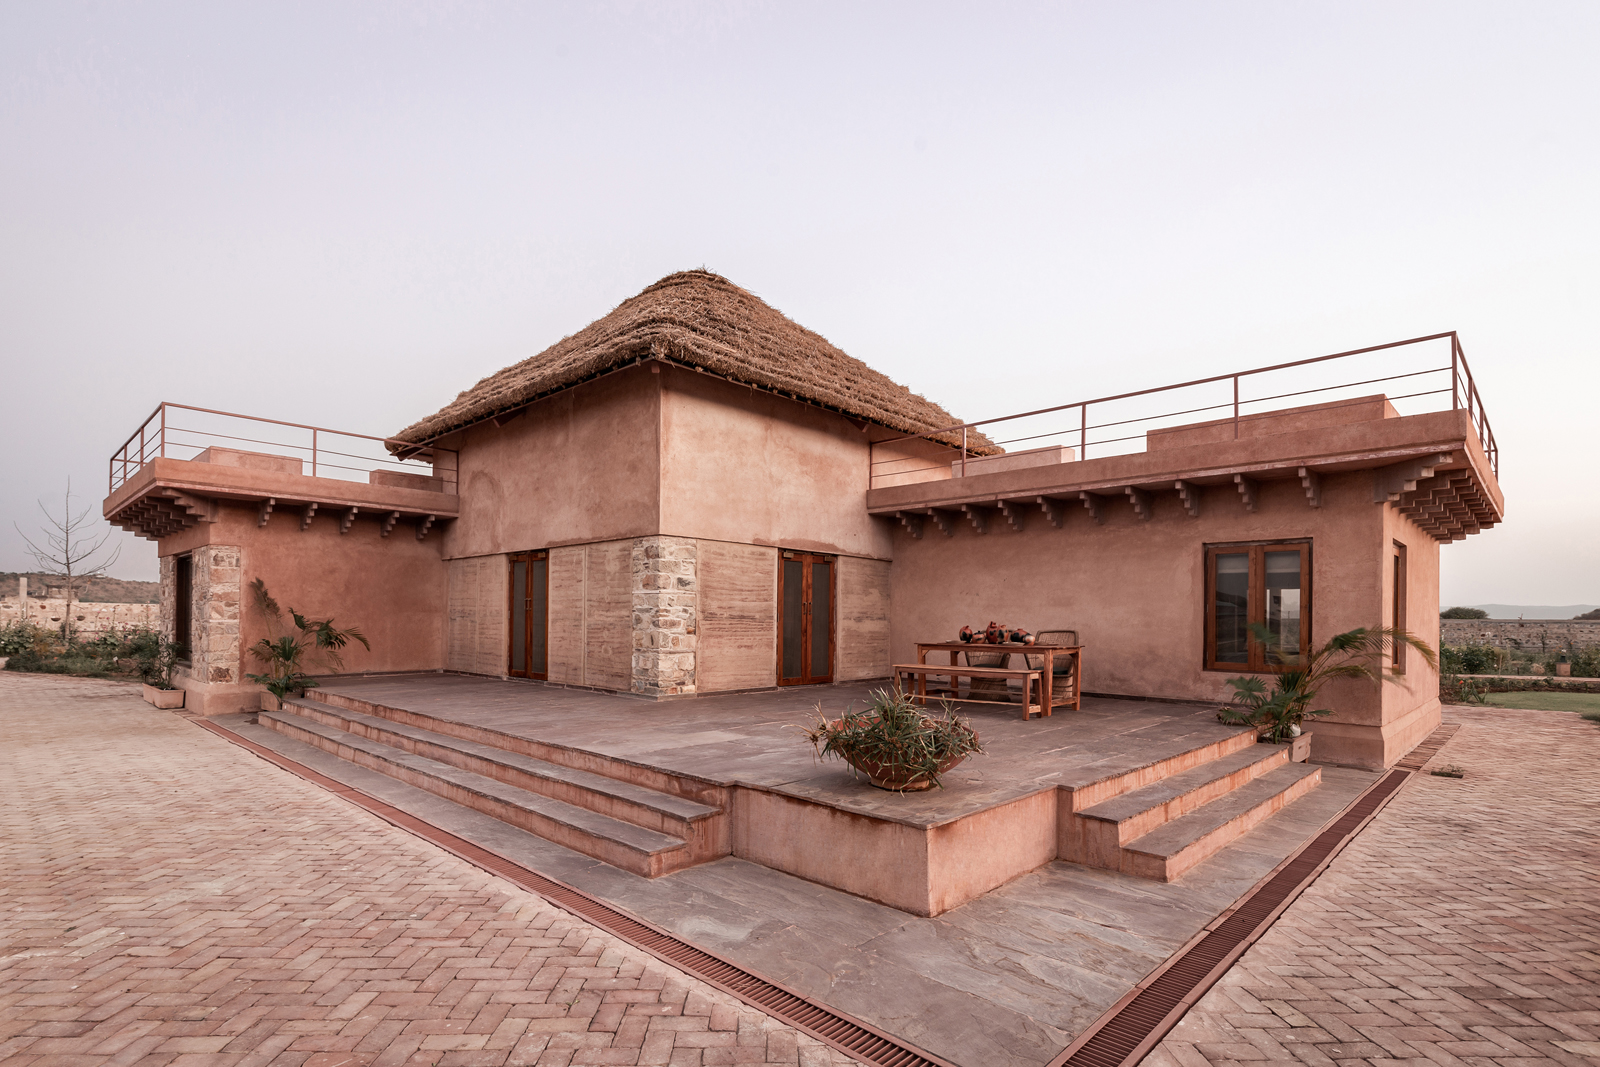 Mud House has two roof terraces at both ends